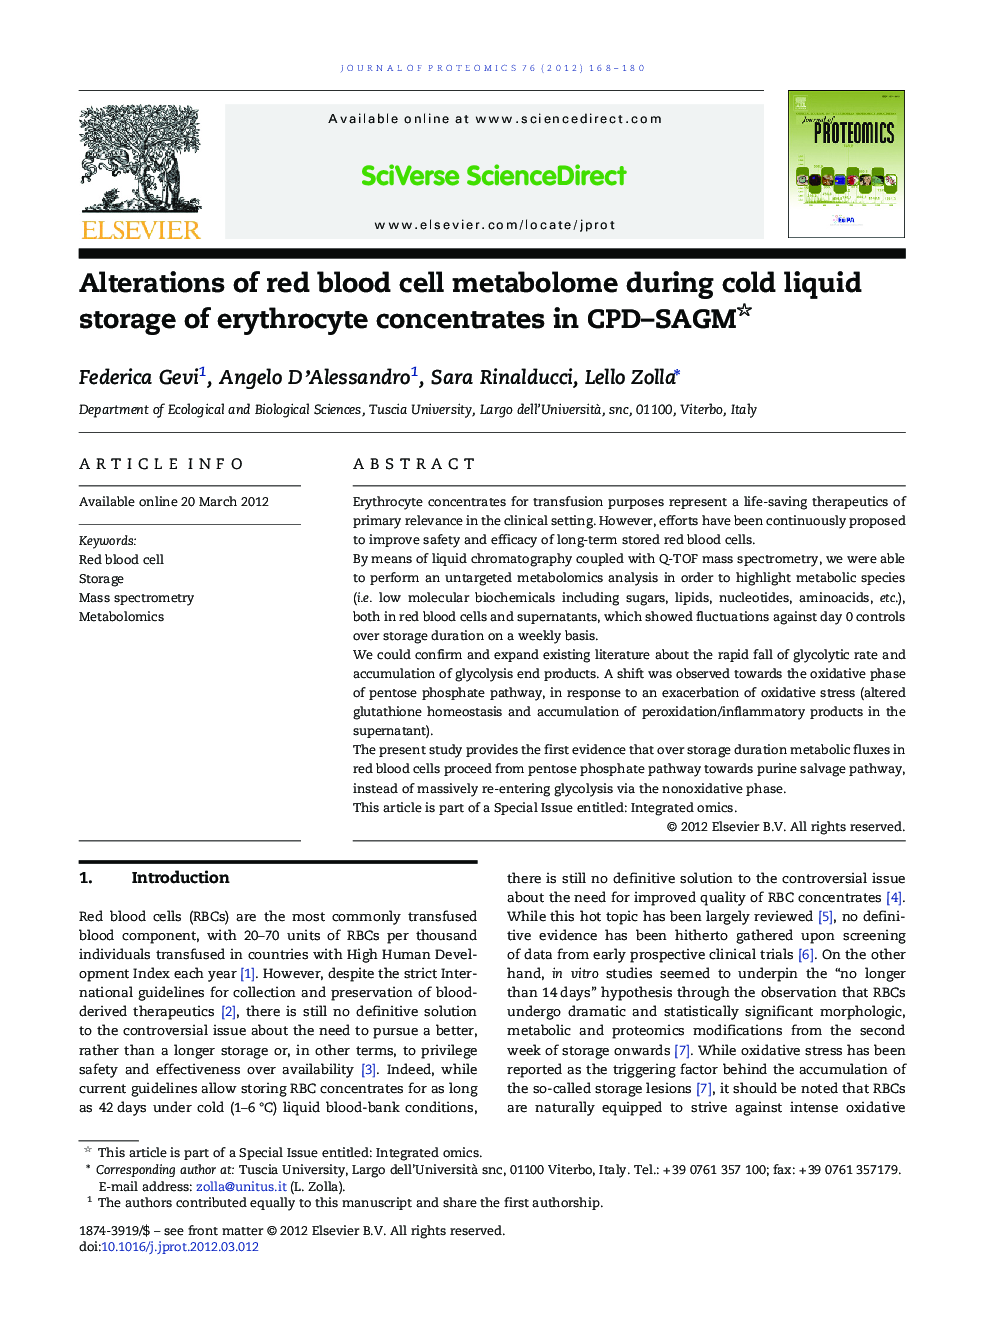 Alterations of red blood cell metabolome during cold liquid storage of erythrocyte concentrates in CPD-SAGM